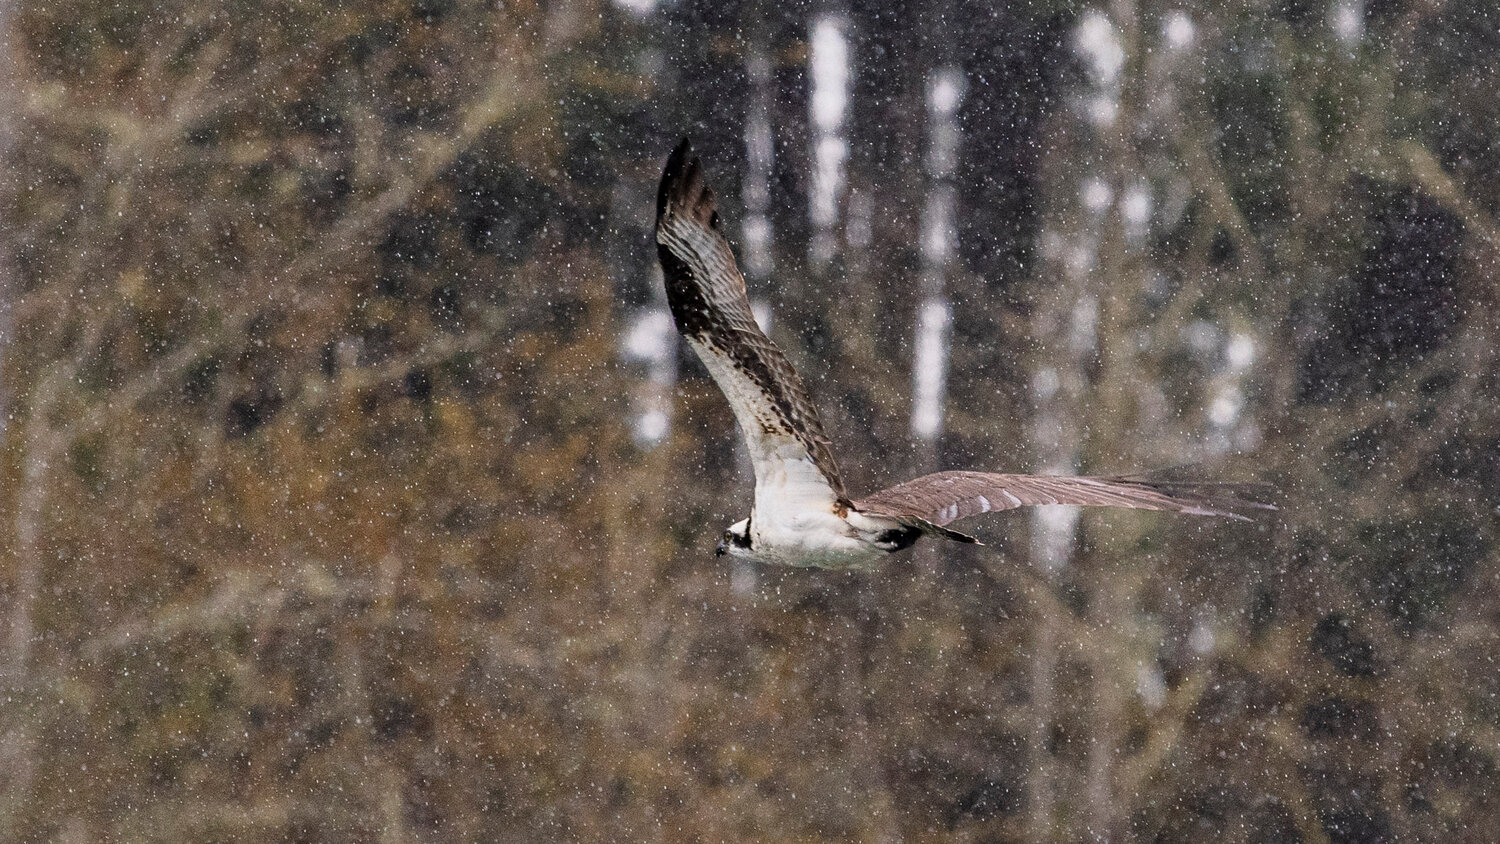 An osprey glides through water droplets while hunting outside the Cowlitz Salmon Hatchery in Salkum on Monday.